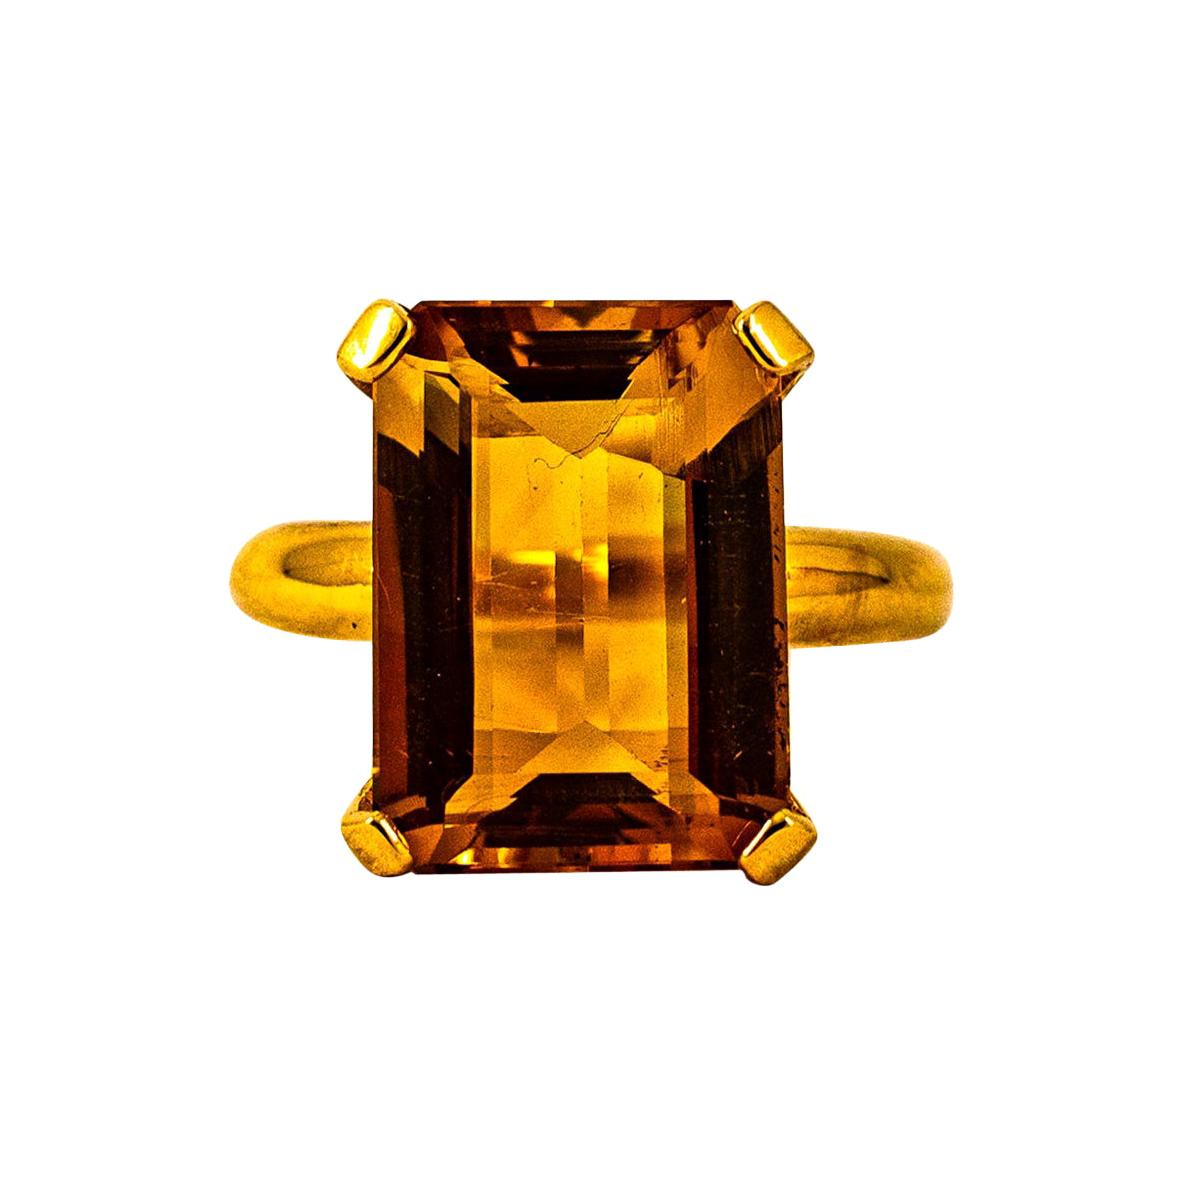 Art Deco Style 10.00 Carat Emerald Cut Citrine Yellow Gold Cocktail Ring